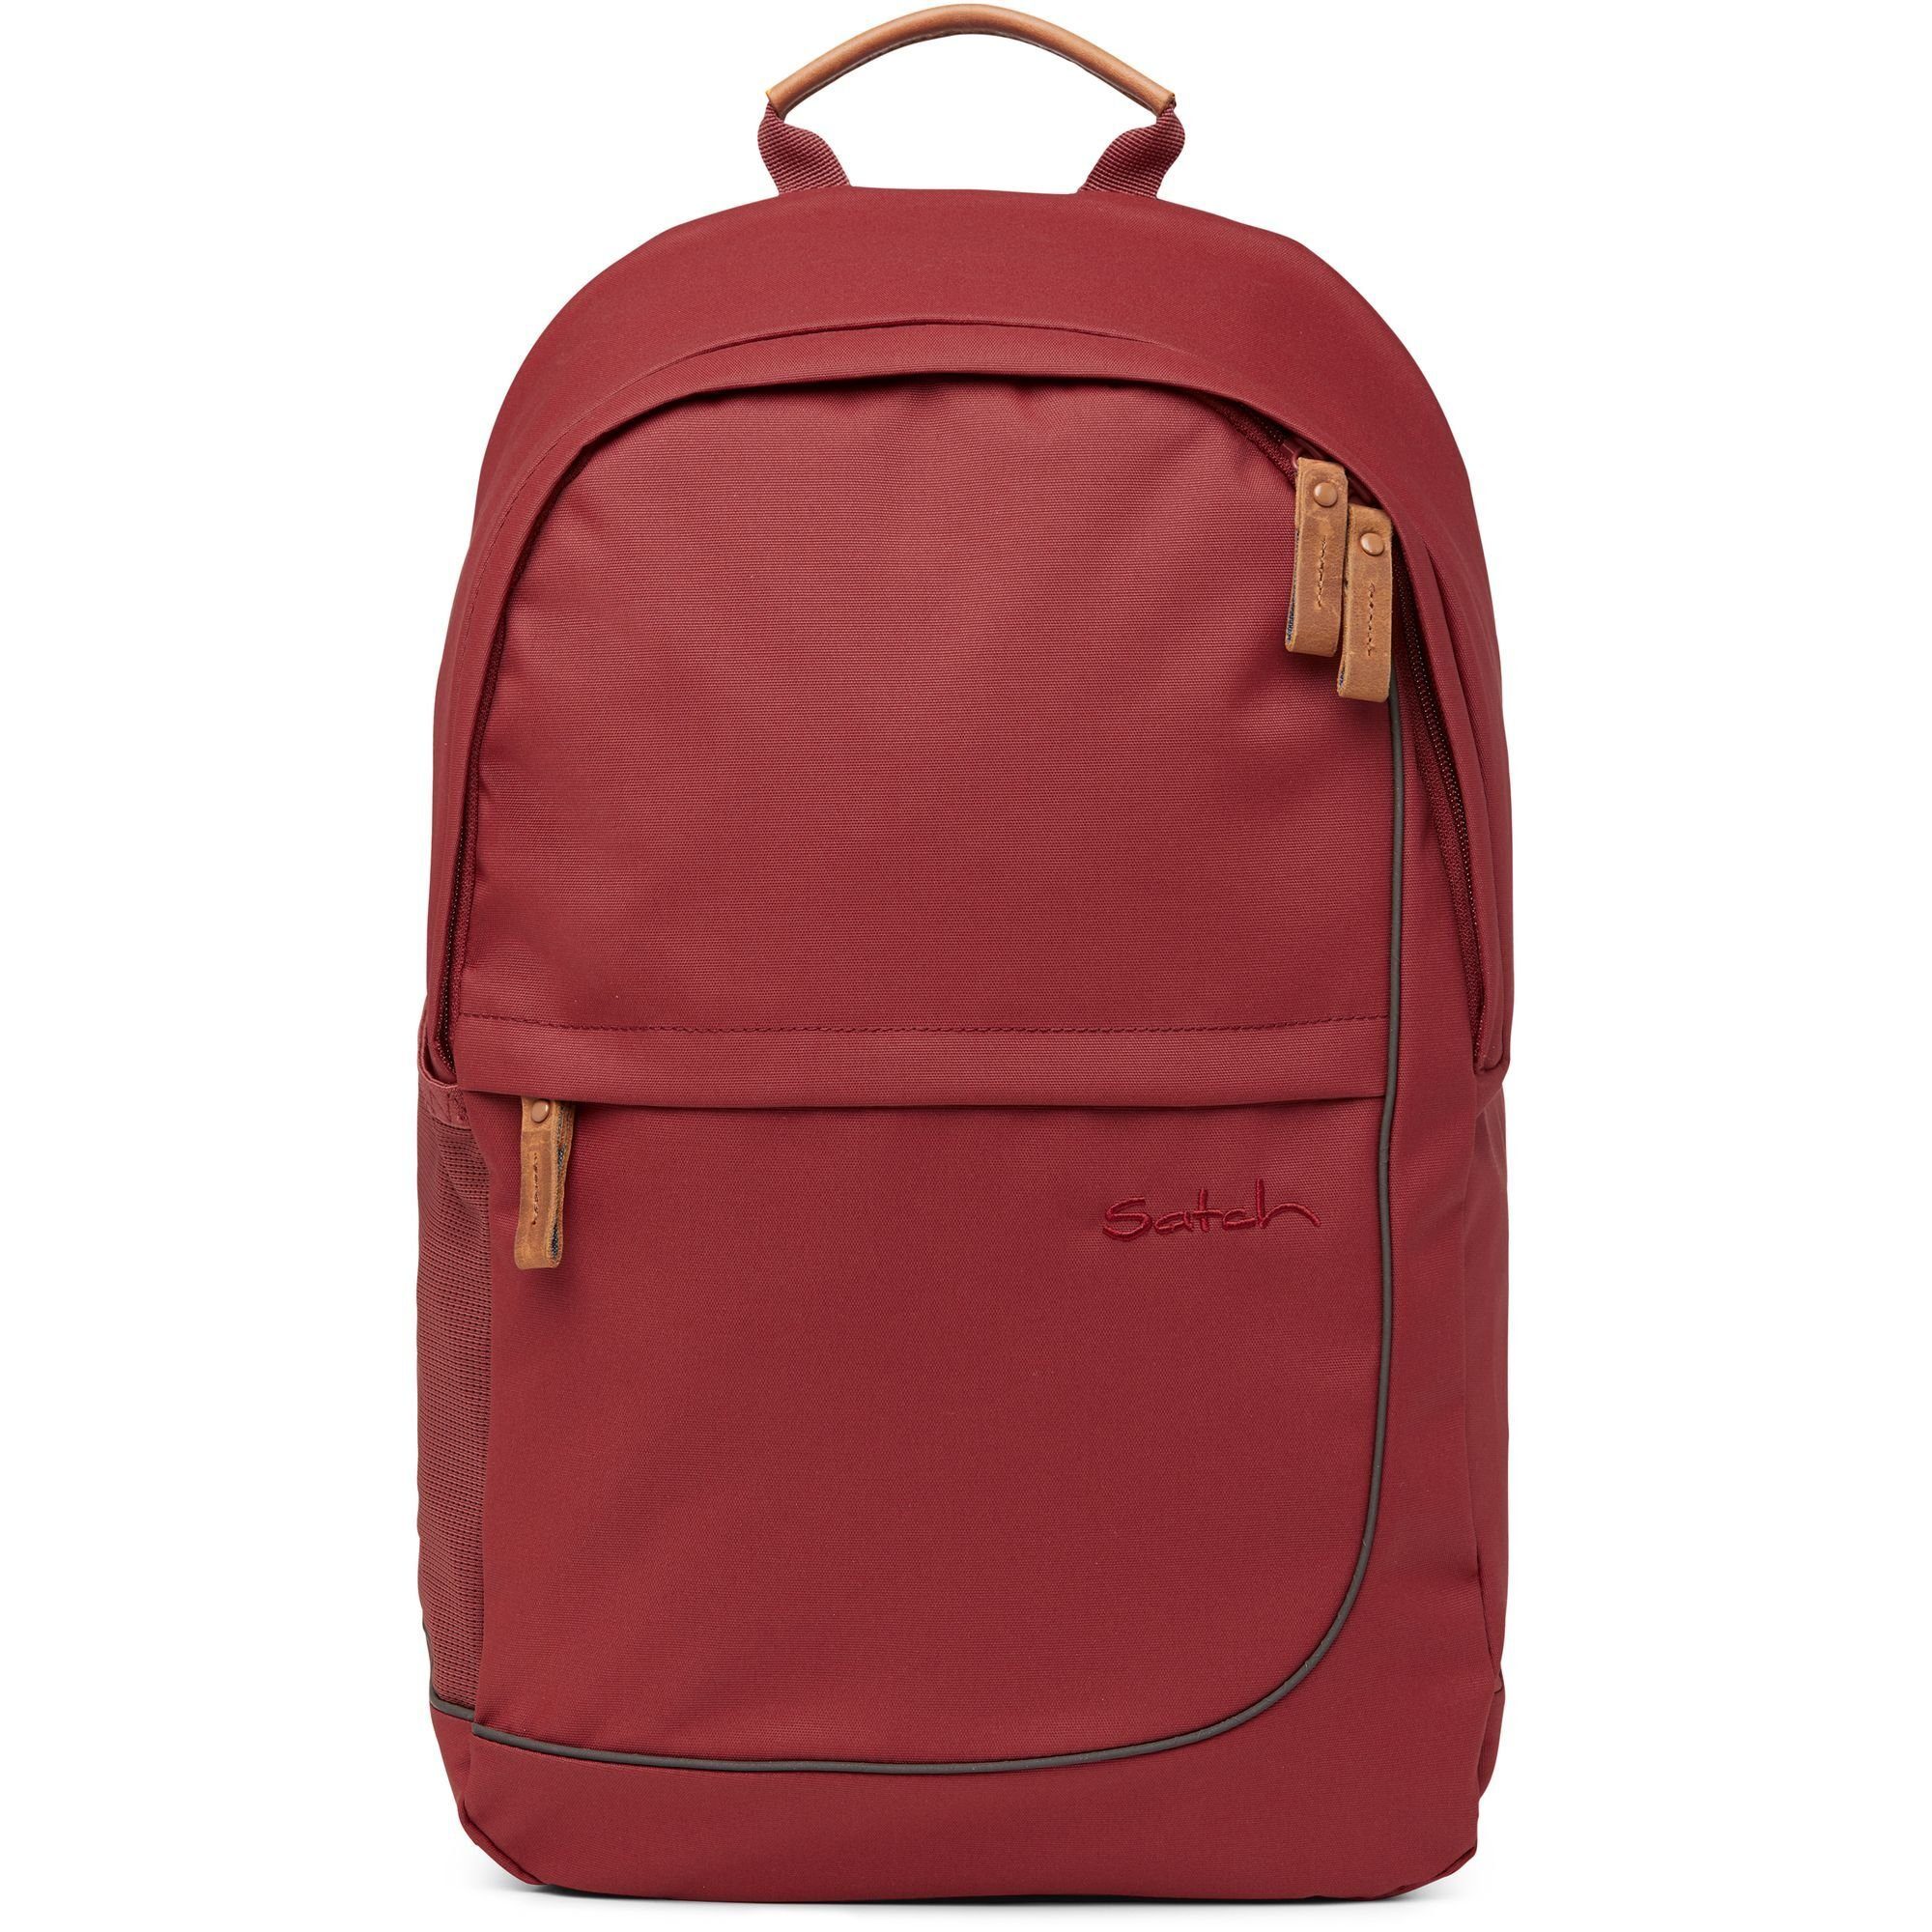 Satch Daypack fly, PET red